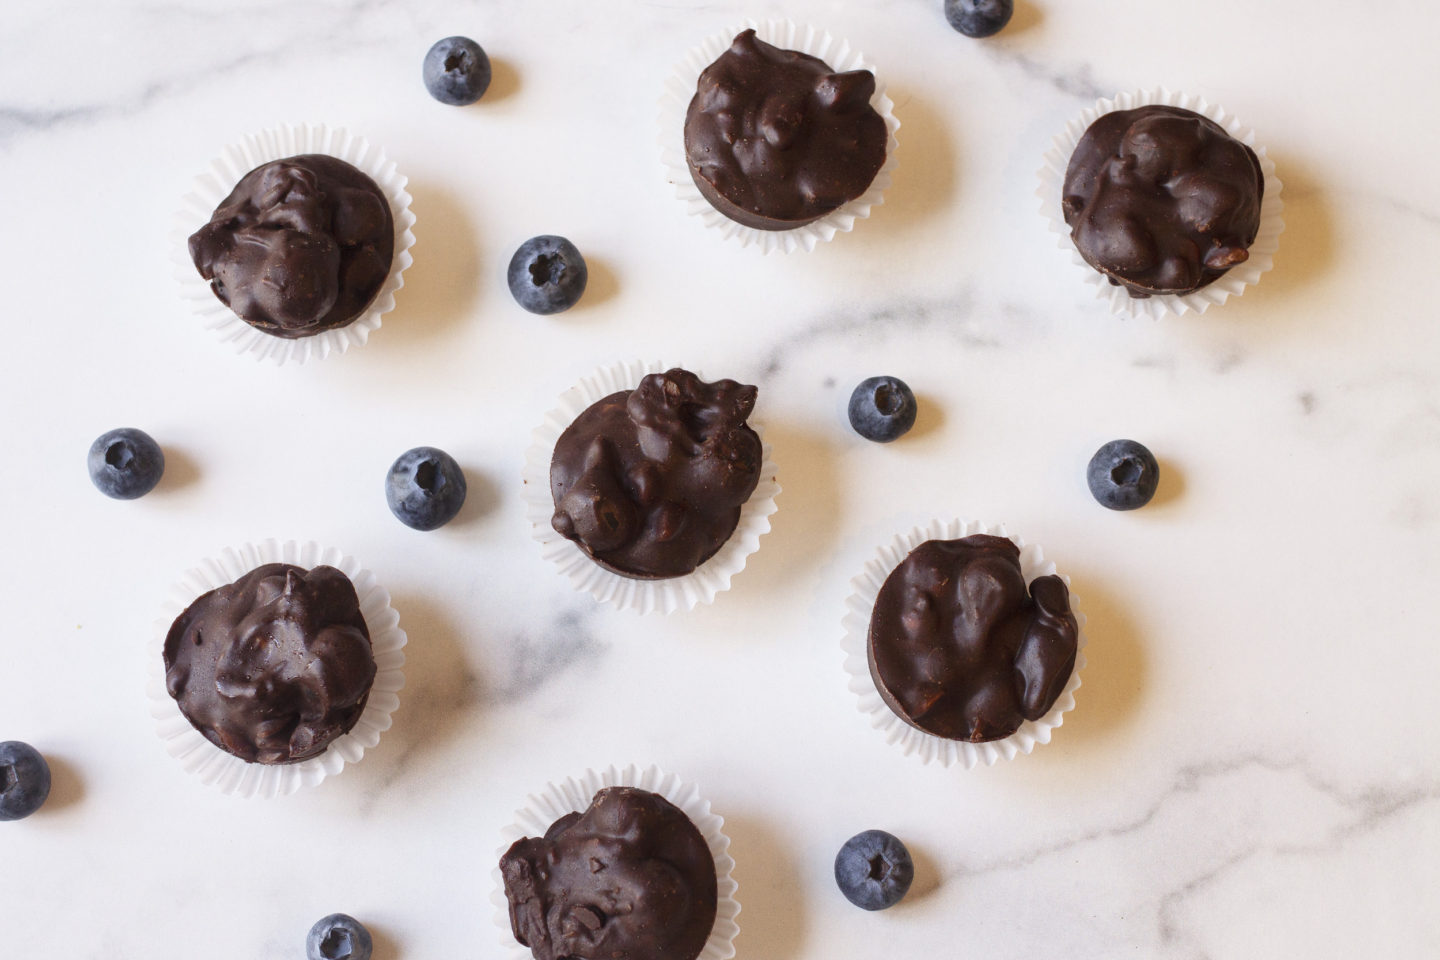 Homemade chocolate with blueberries and macadamia nuts